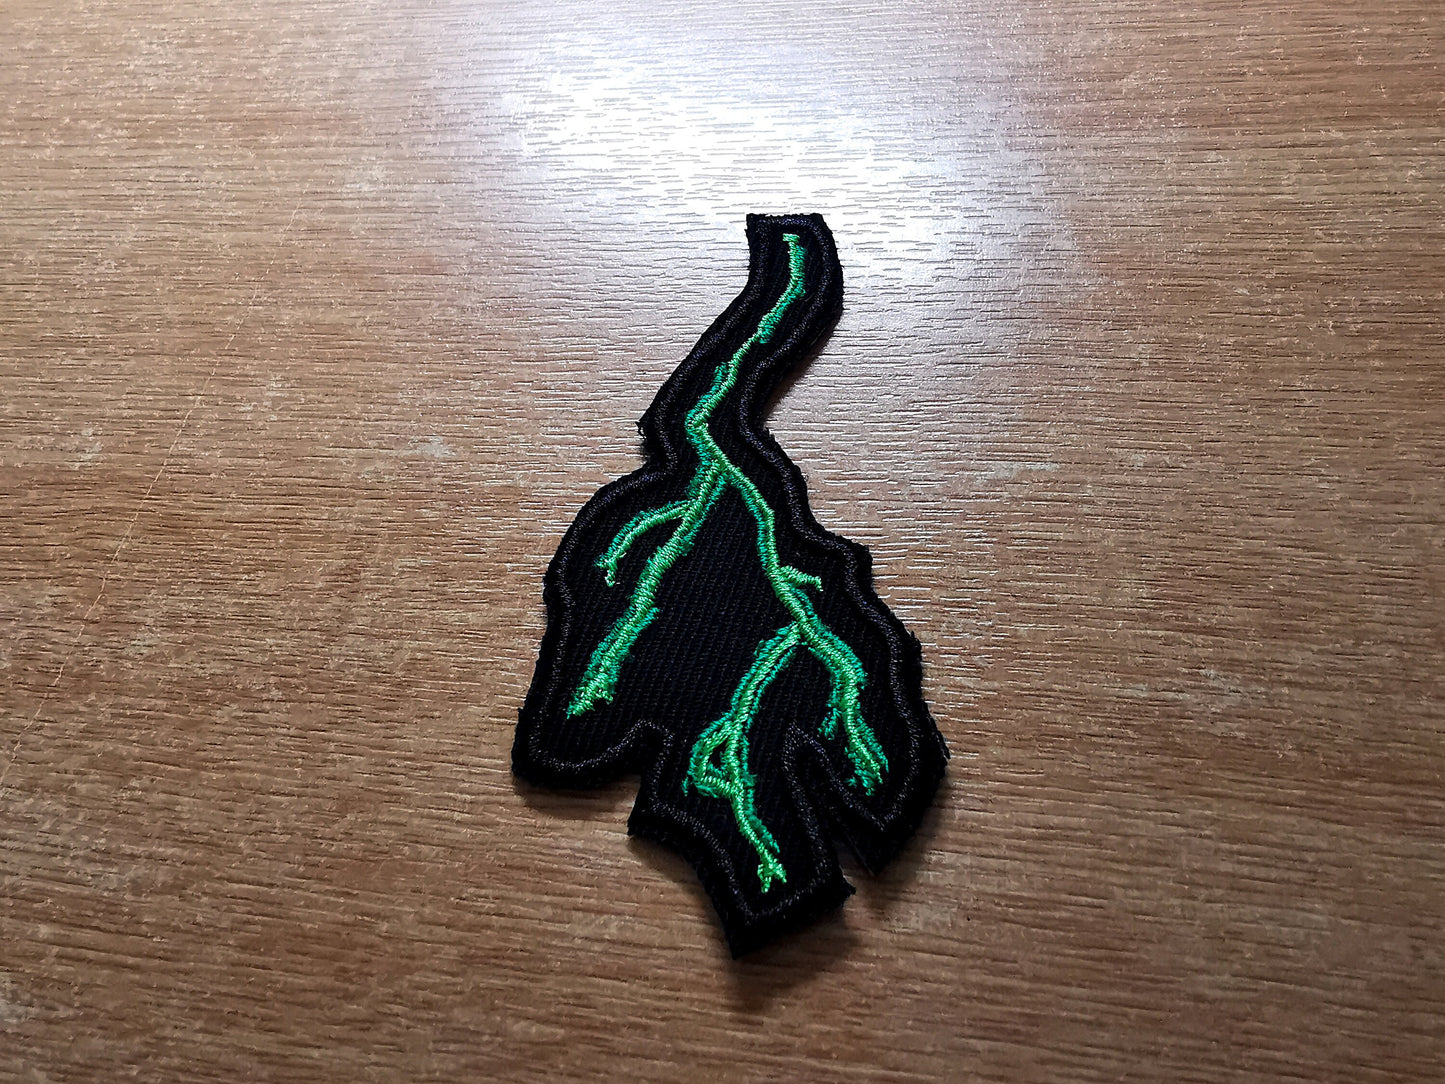 Forked Lightning Green Iron On Embroidered Patch Gothic Thrash Death Black Metal Battlejacket